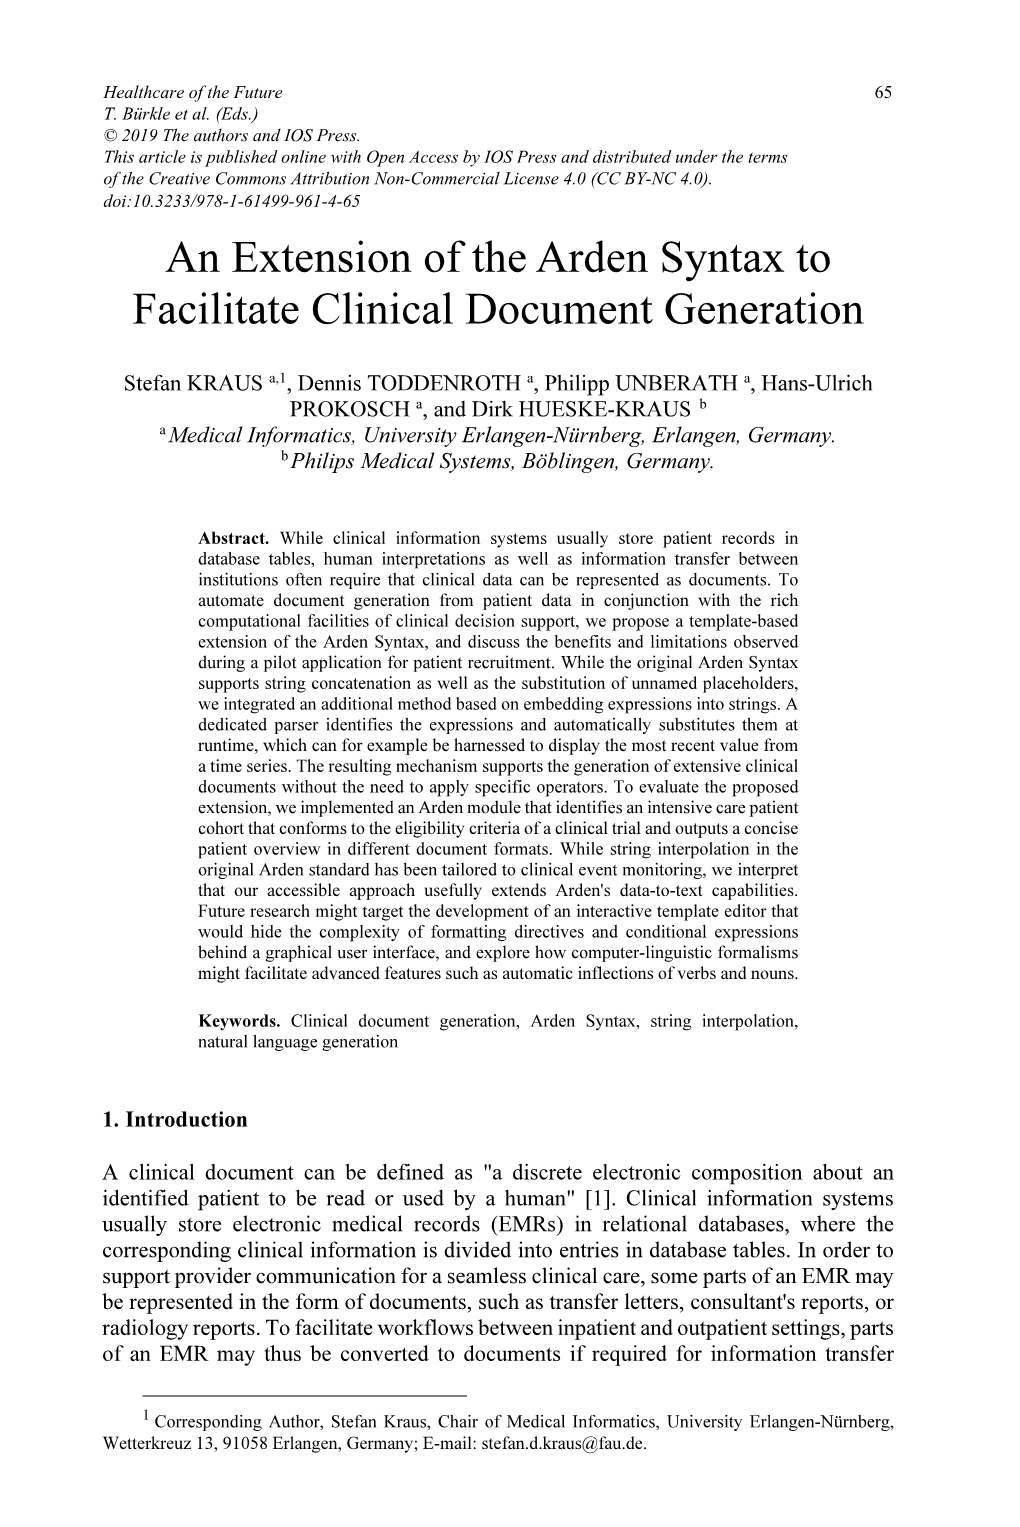 An Extension of the Arden Syntax to Facilitate Clinical Document Generation